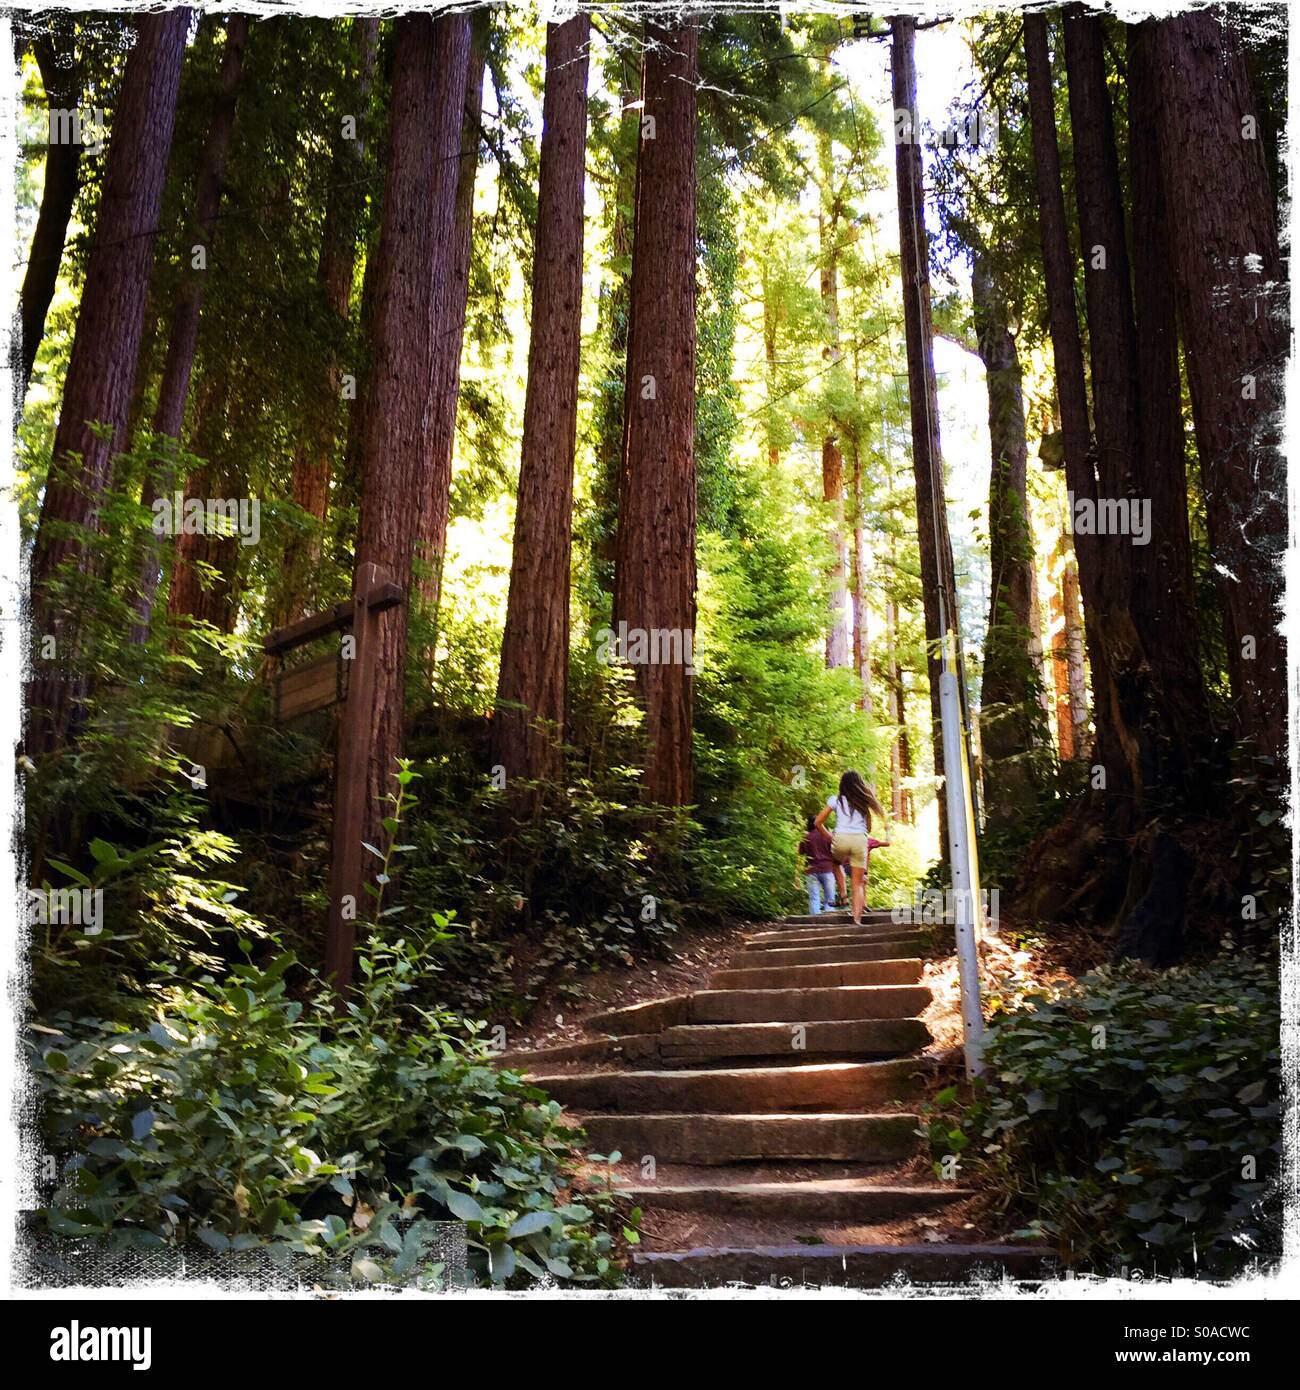 A ten year old girl and her six year old brother walk up stairs on a path in California's Redwoods. Santa Cruz County, California, USA Stock Photo